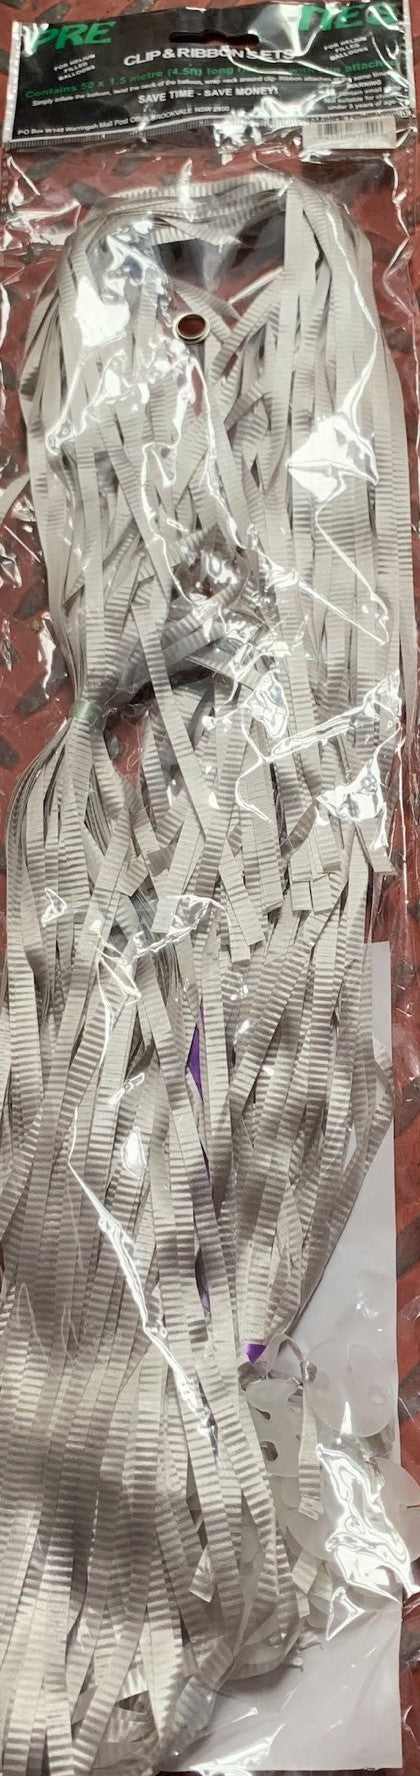 50 x Pre-cut curling ribbon with balloon tie 1.5m Ribbons Parties Weddings New